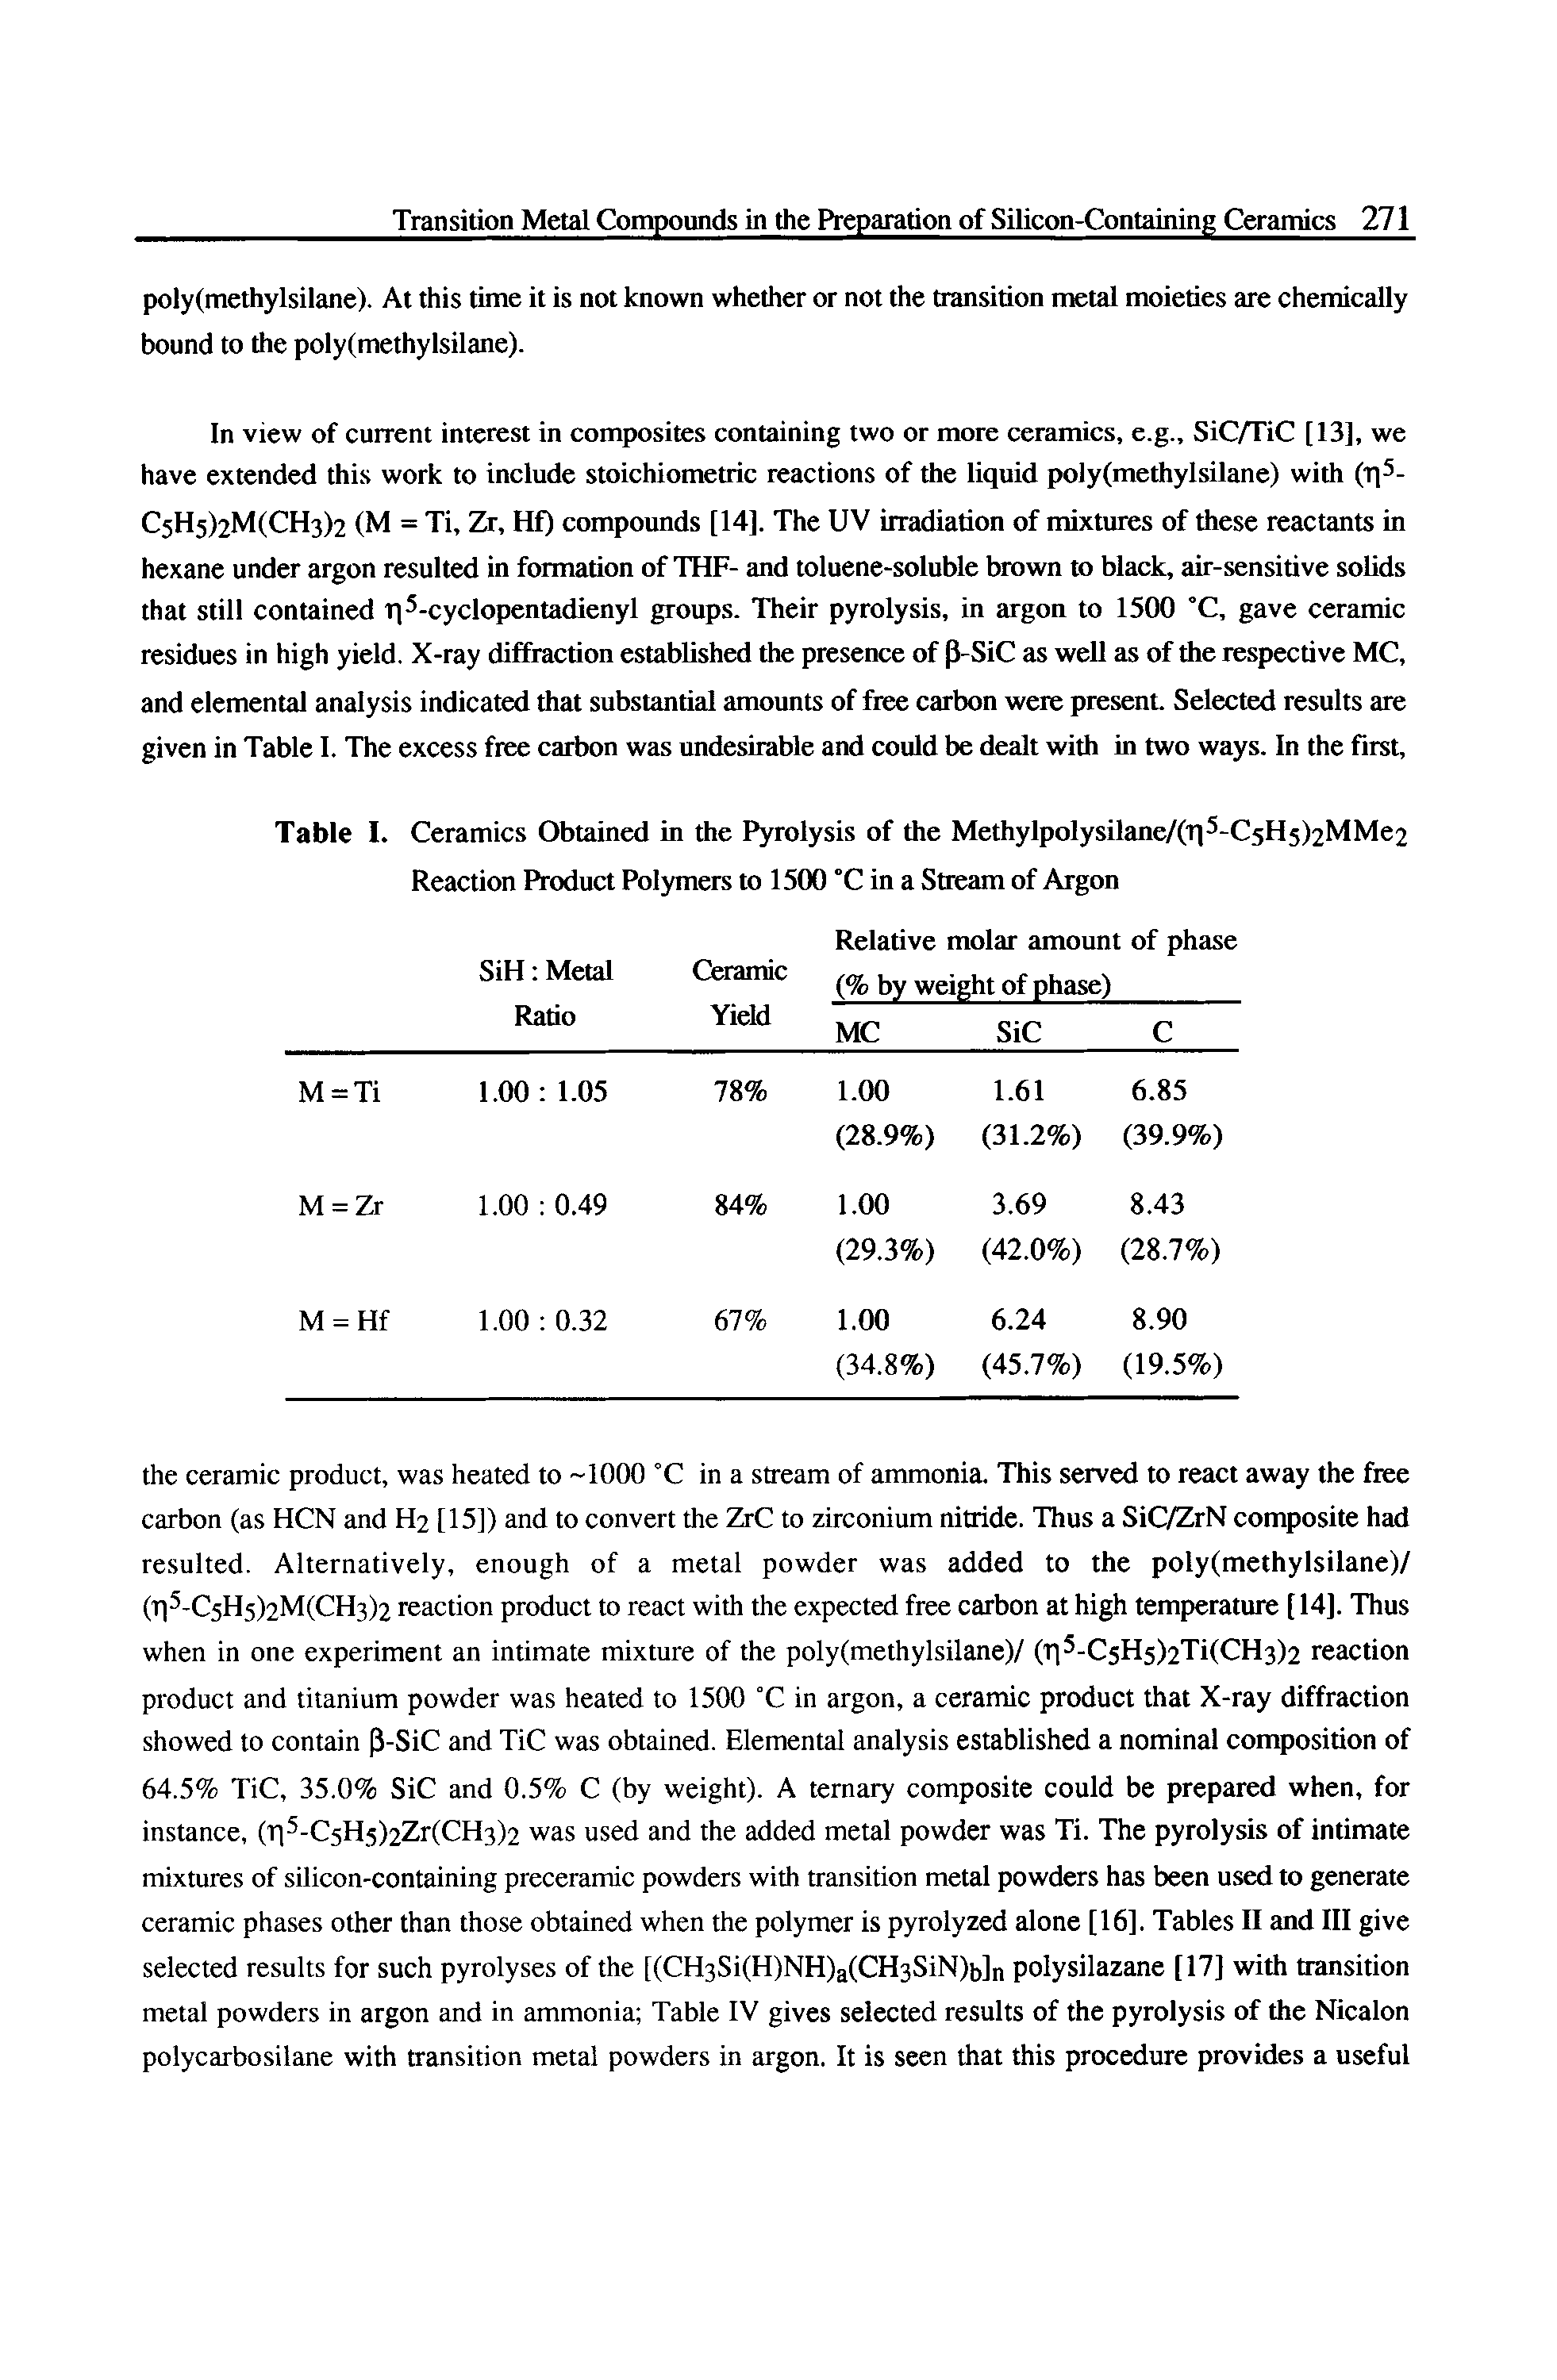 Table I. Ceramics Obtained in the Pyrolysis of the Methylpolysilane/(T]5-C5H5)2MMe2 Reaction Product Polymers to 1500 °C in a Stream of Argon...